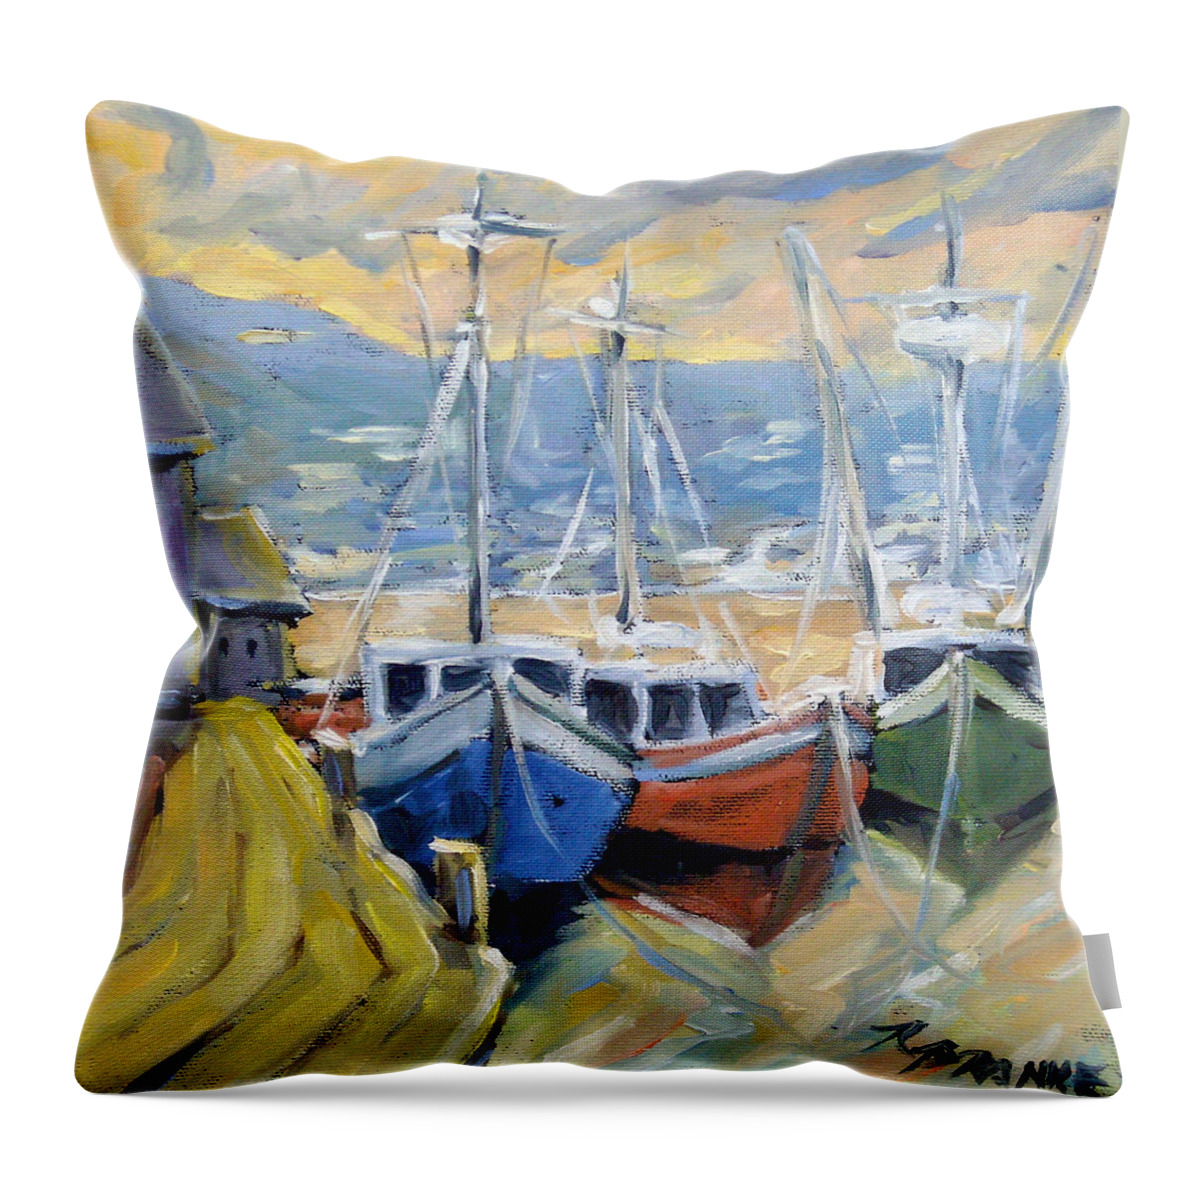 Sea Throw Pillow featuring the painting Sunset Bay by Richard T Pranke